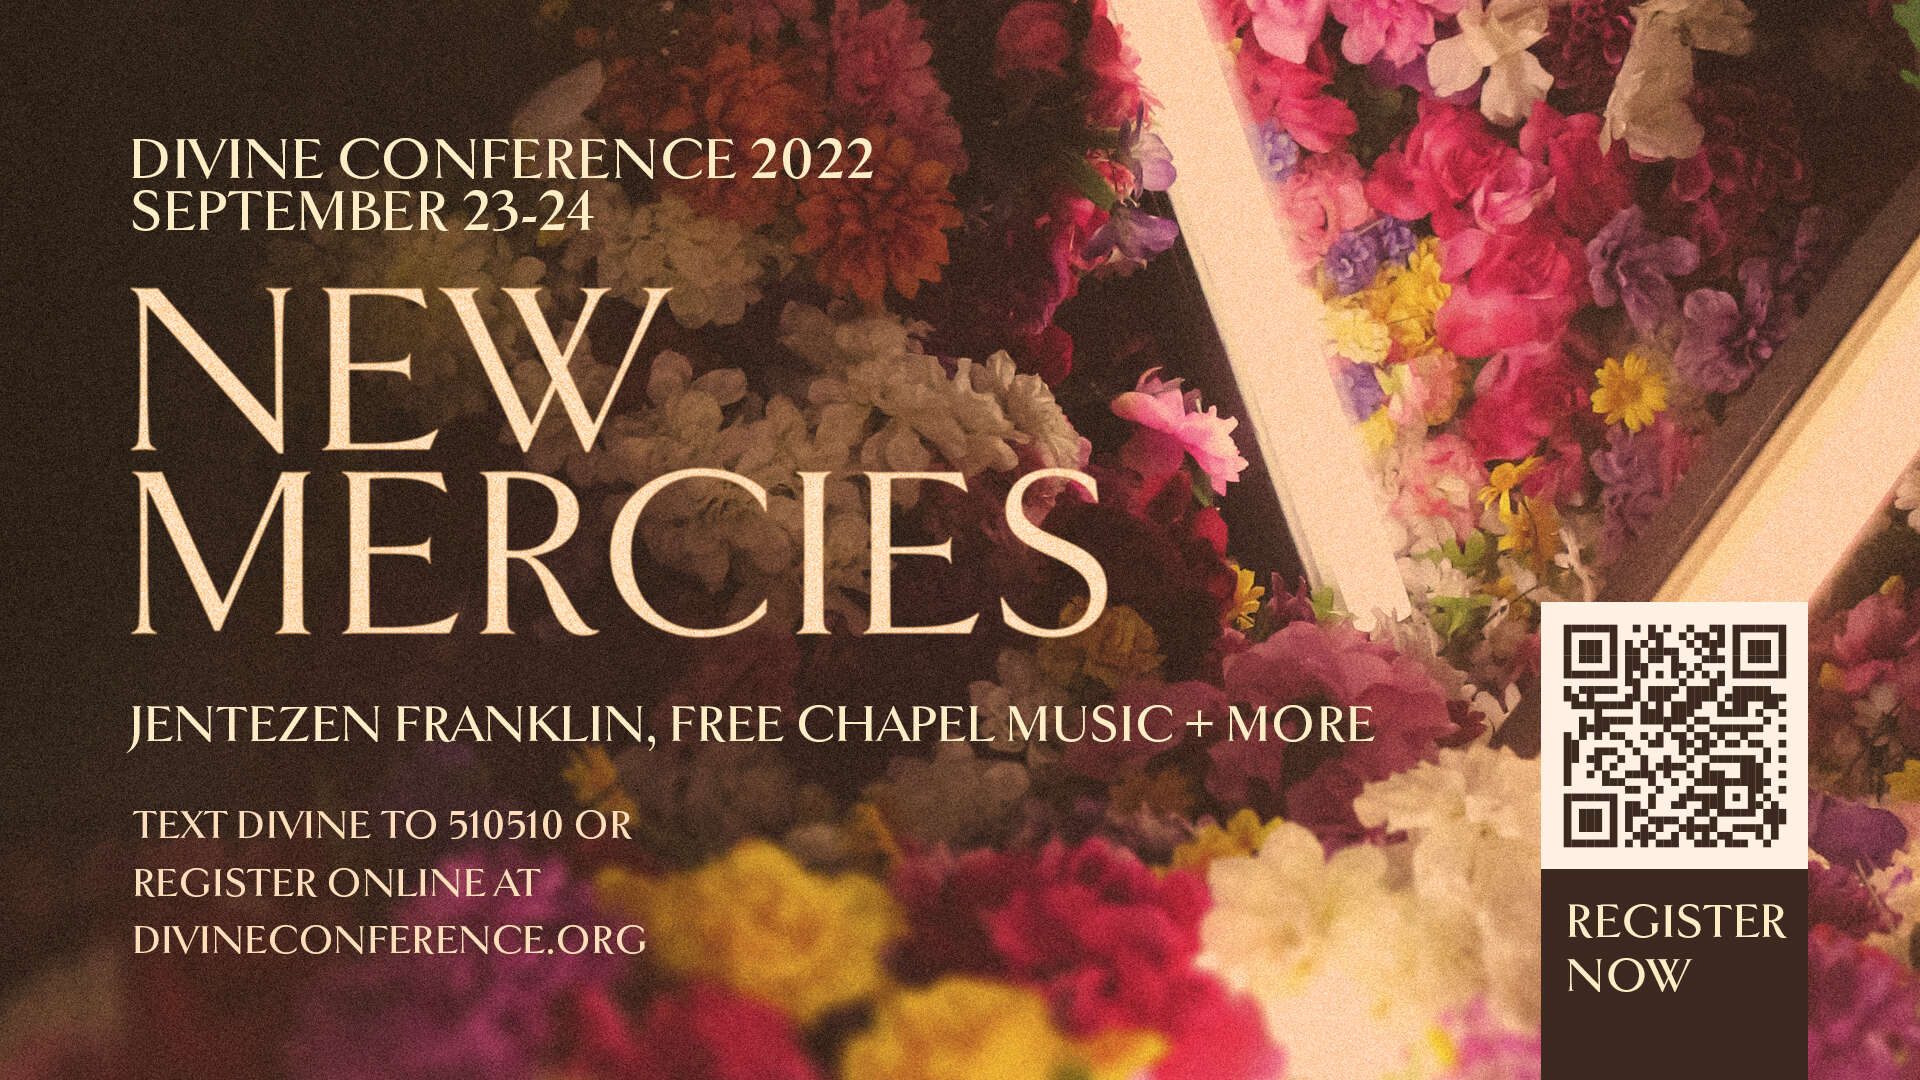 DIVINE Conference OC at Orange County | Free Chapel